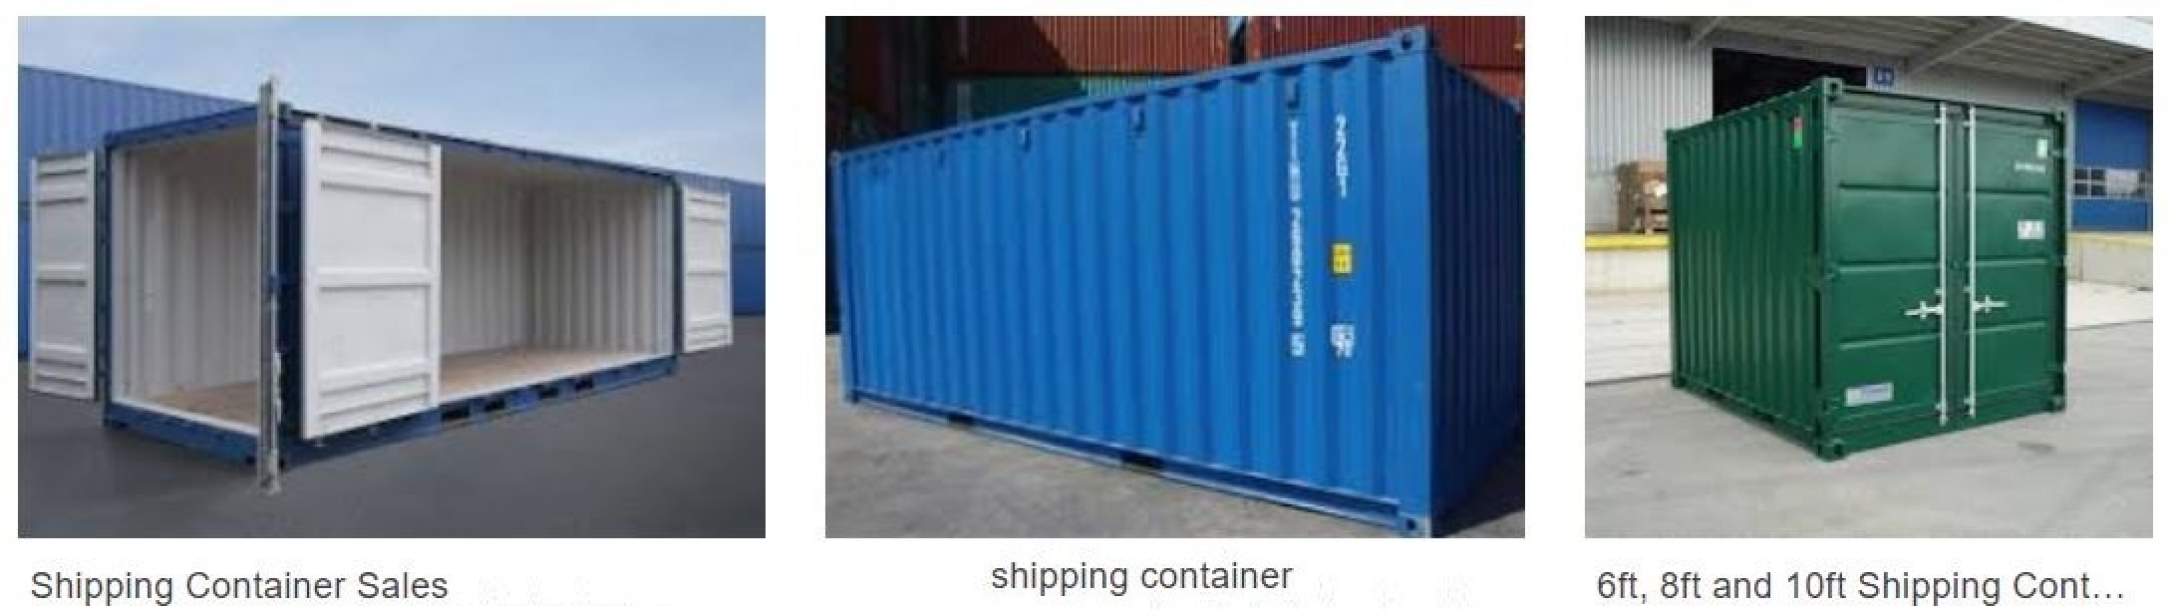 gallery/buy a shipping container4